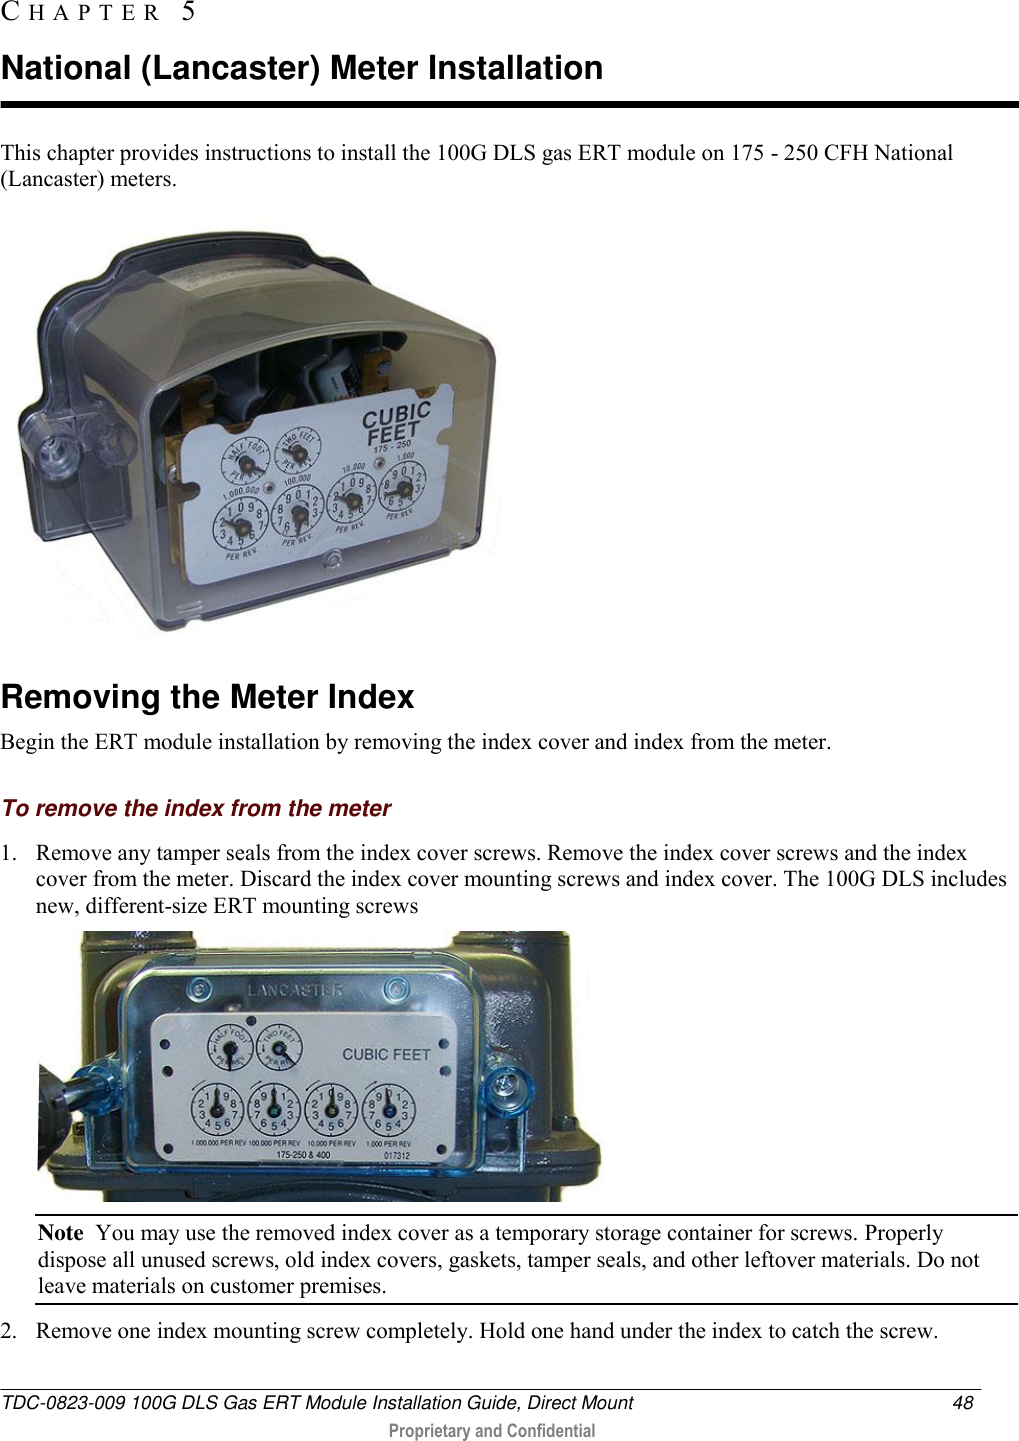  TDC-0823-009 100G DLS Gas ERT Module Installation Guide, Direct Mount  48   Proprietary and Confidential     This chapter provides instructions to install the 100G DLS gas ERT module on 175 - 250 CFH National (Lancaster) meters.    Removing the Meter Index Begin the ERT module installation by removing the index cover and index from the meter.  To remove the index from the meter 1. Remove any tamper seals from the index cover screws. Remove the index cover screws and the index cover from the meter. Discard the index cover mounting screws and index cover. The 100G DLS includes new, different-size ERT mounting screws   Note  You may use the removed index cover as a temporary storage container for screws. Properly dispose all unused screws, old index covers, gaskets, tamper seals, and other leftover materials. Do not leave materials on customer premises.  2. Remove one index mounting screw completely. Hold one hand under the index to catch the screw.  CH A P T E R   5  National (Lancaster) Meter Installation 